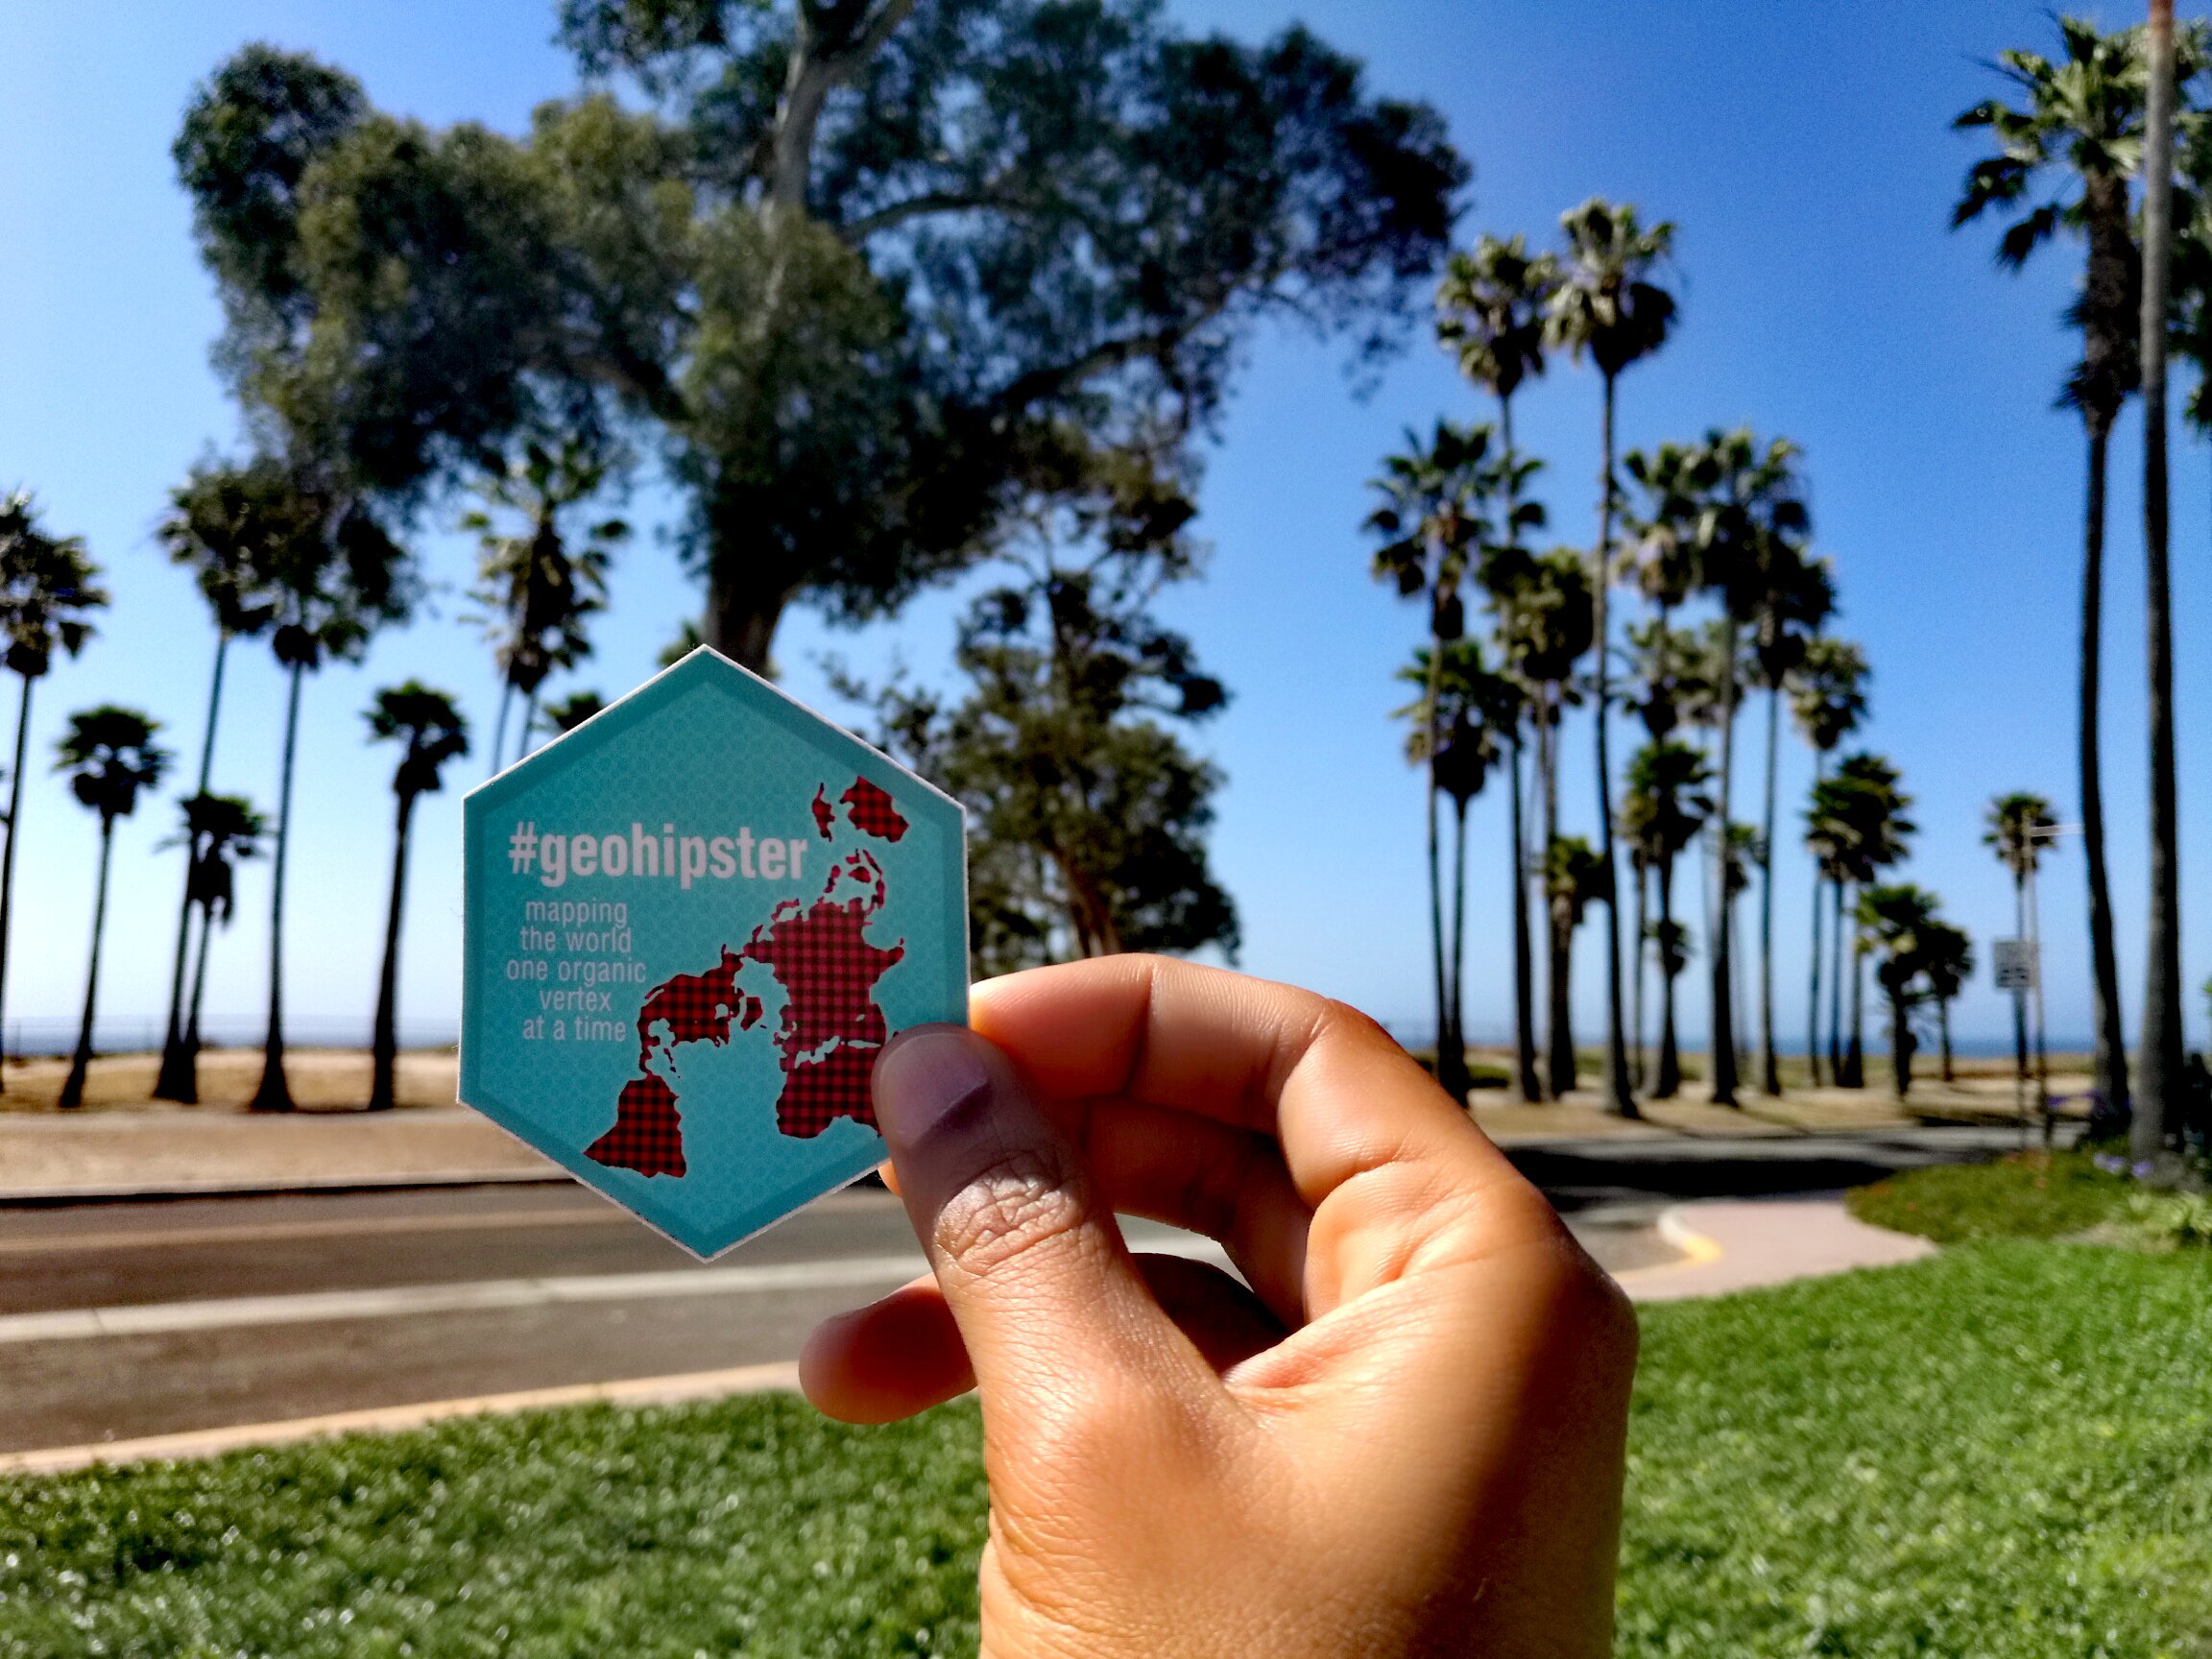 A picture of the GeoHipster sticker in Southern California